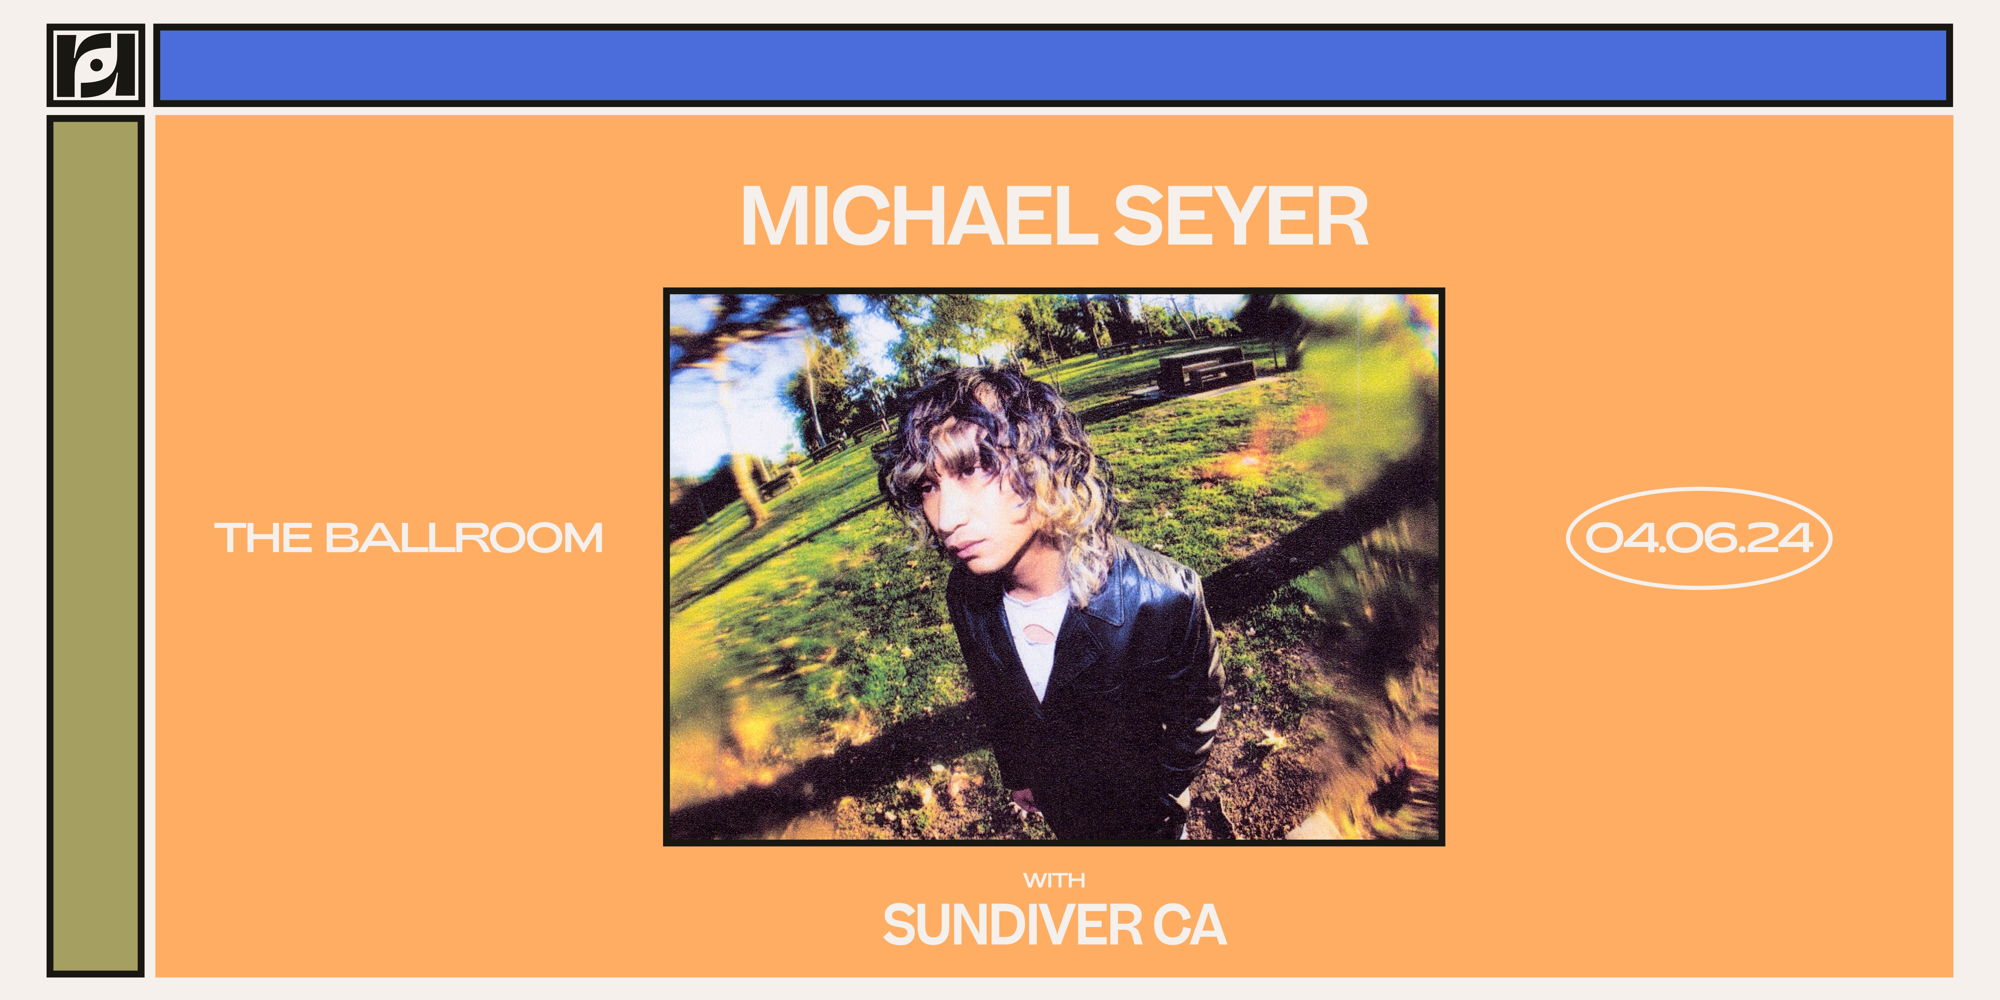 Resound Presents: Michael Seyer at The Ballroom promotional image